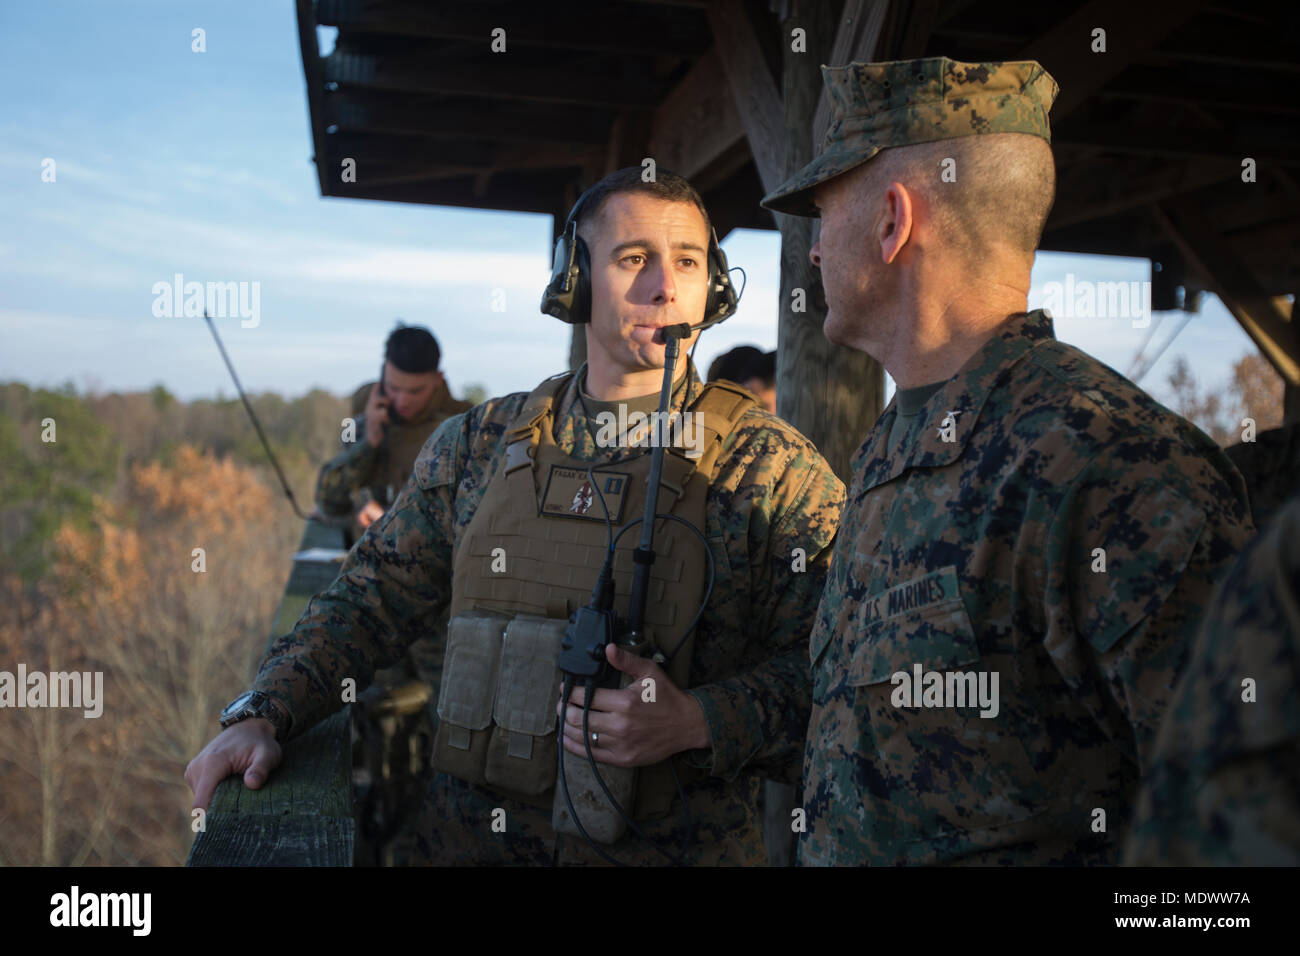 Maj. Gen. John Love speaks with Capt. Edward Fagan during his visit with Marines and sailors with 2nd Battalion, 8th Marine Regiment during the unit’s deployment for training exercise at Fort A.P. Hill, Va., Dec. 4, 2017. The visit allowed Love to observe the battalion’s readiness for an upcoming deployment to Japan. Love is the commanding general of 2nd Marine Division. (U.S. Marine Corps photo by Lance Cpl. Ashley McLaughlin) Stock Photo